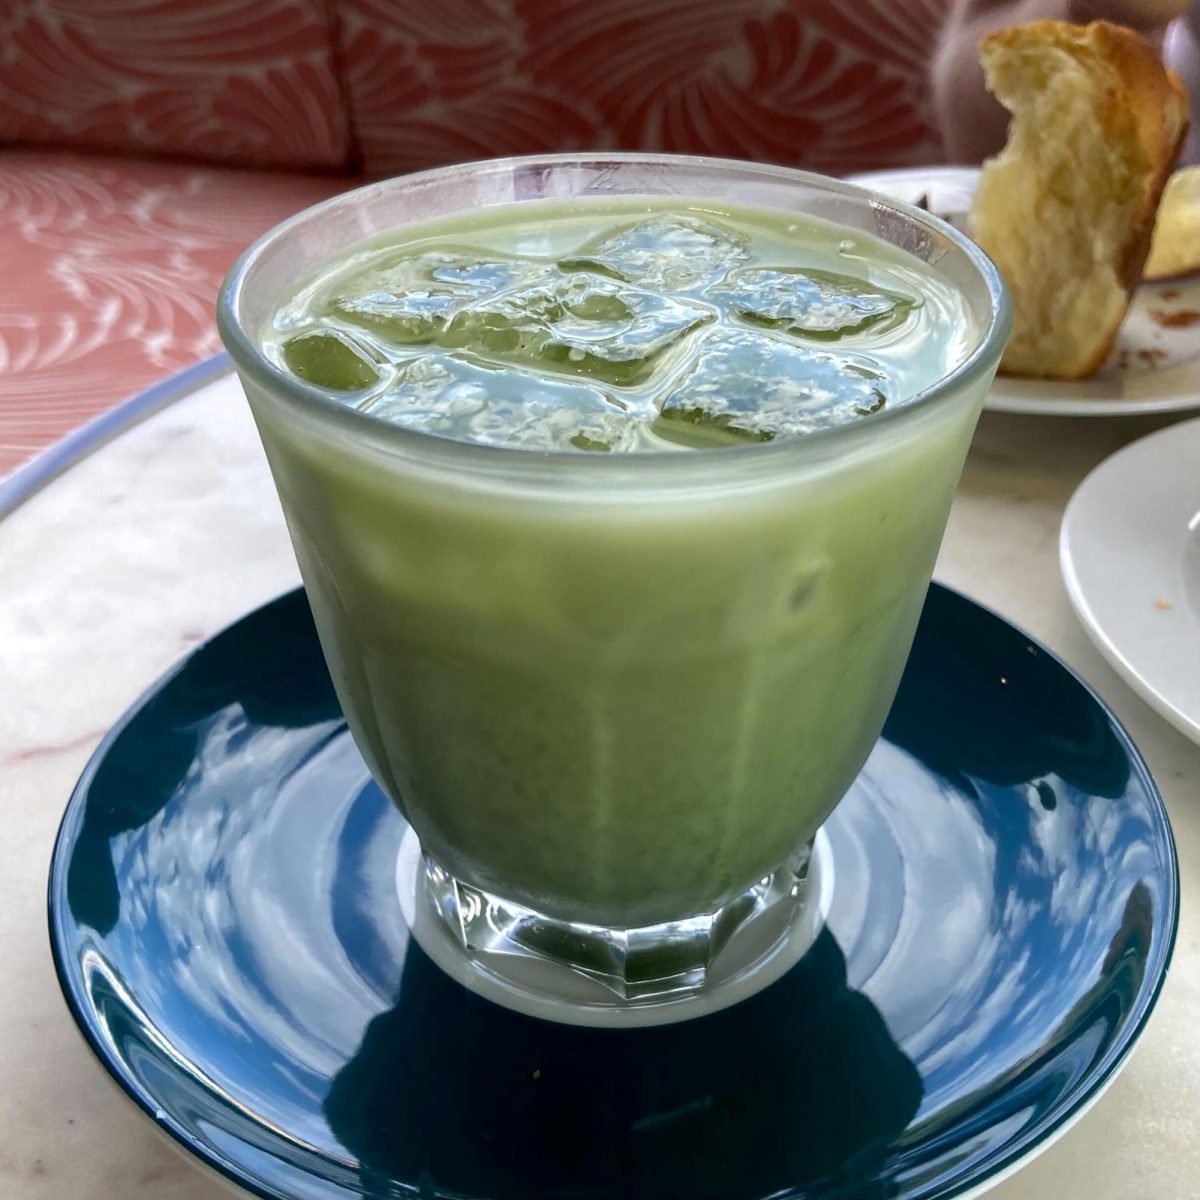 The sweetened iced matcha latte appears with a beautiful green color, making your mouth water before you even take a sip.